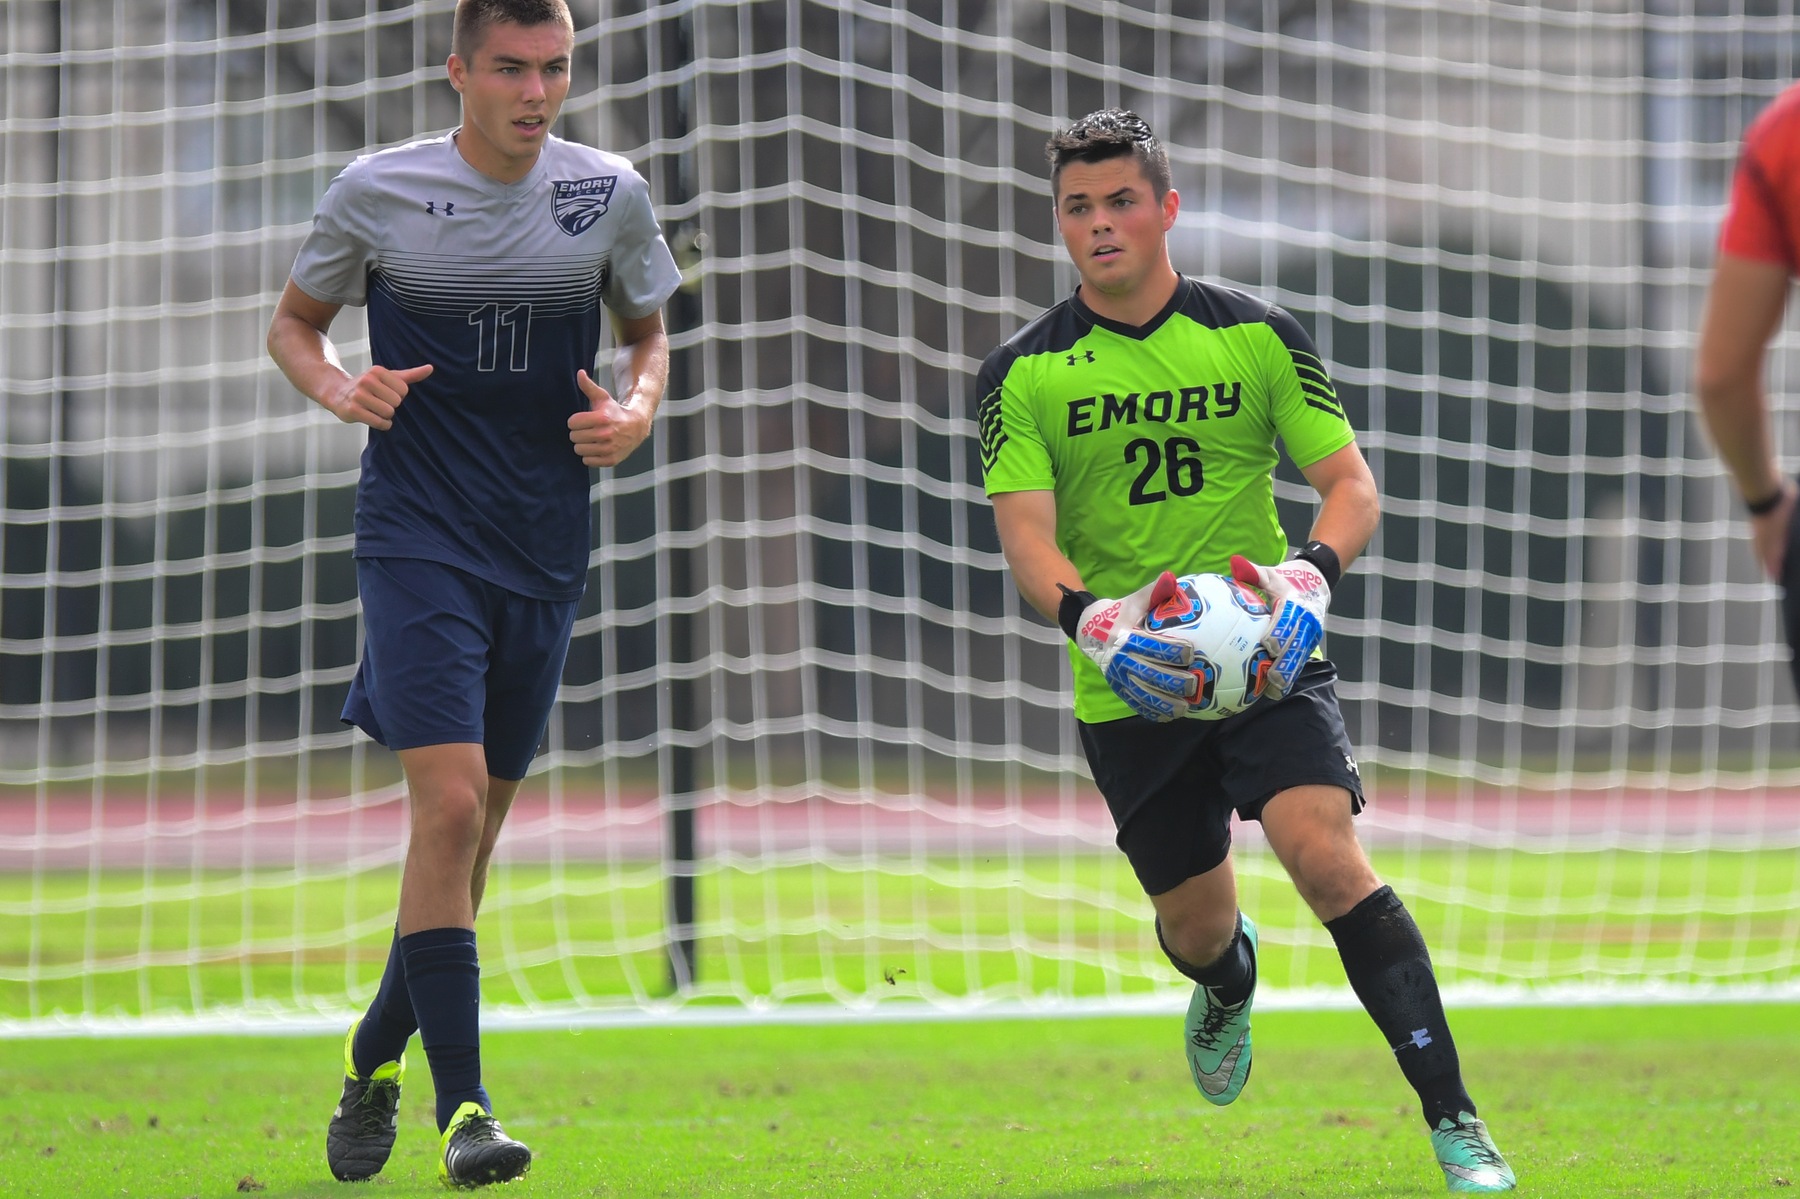 Emory Men's Soccer Rallies for 2-2 Draw at Carnegie Mellon